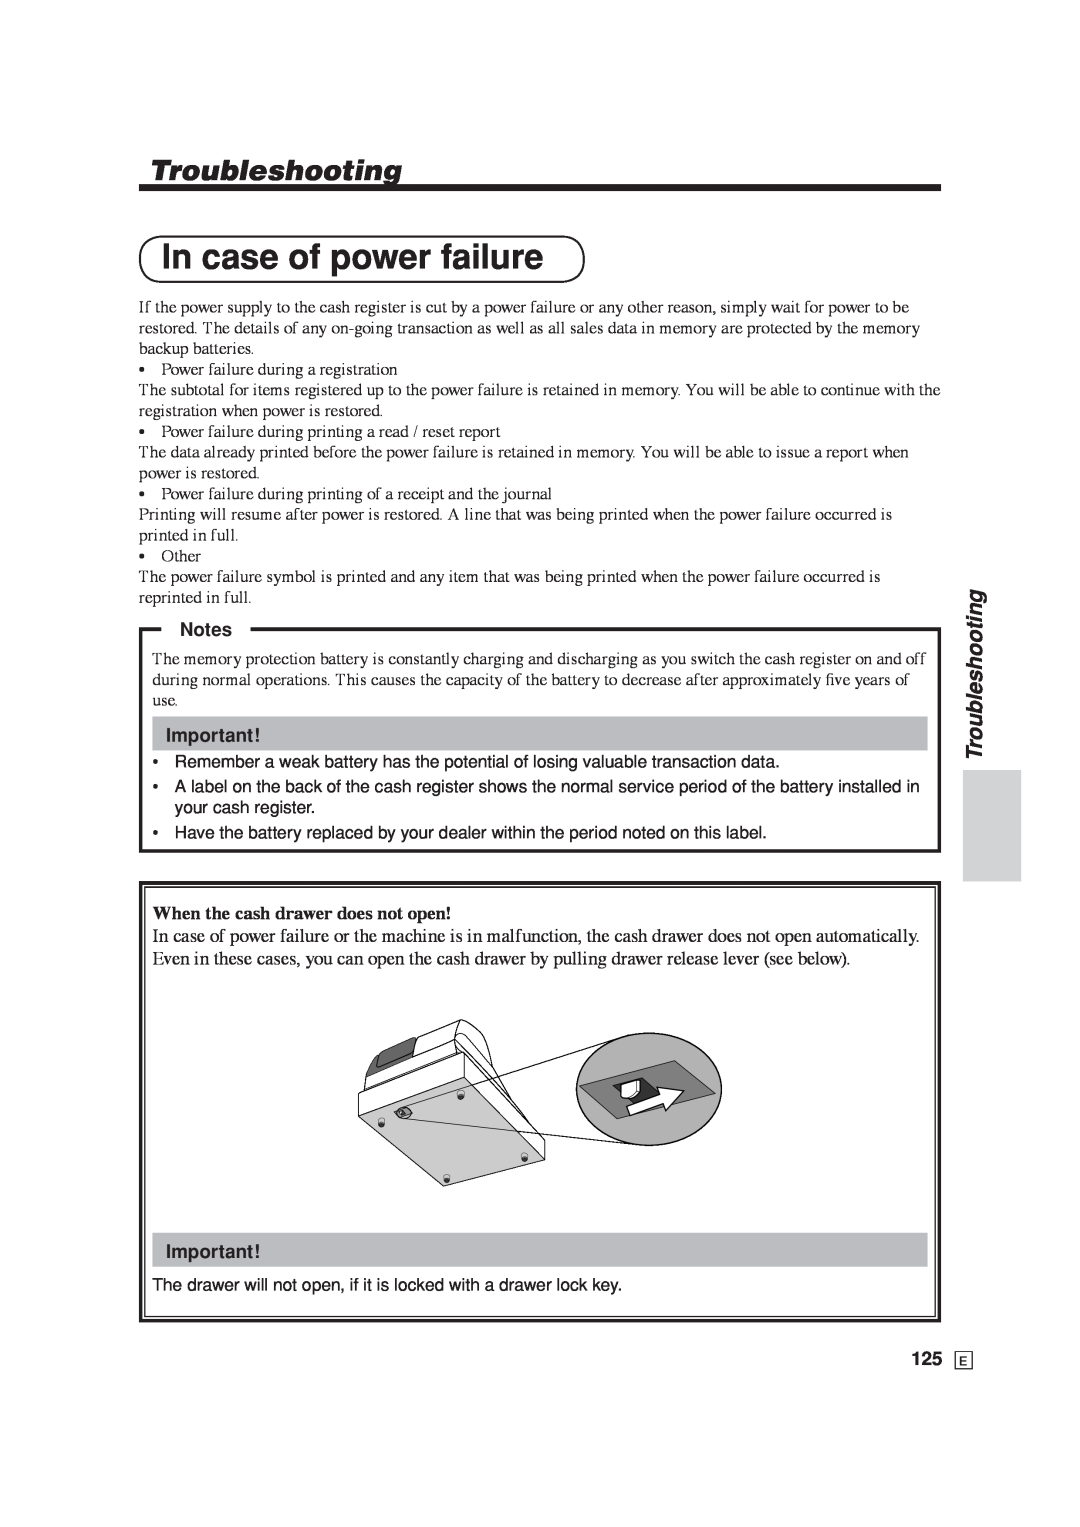 Casio SE-C6000, SE-S6000 user manual In case of power failure, Troubleshooting, When the cash drawer does not open 